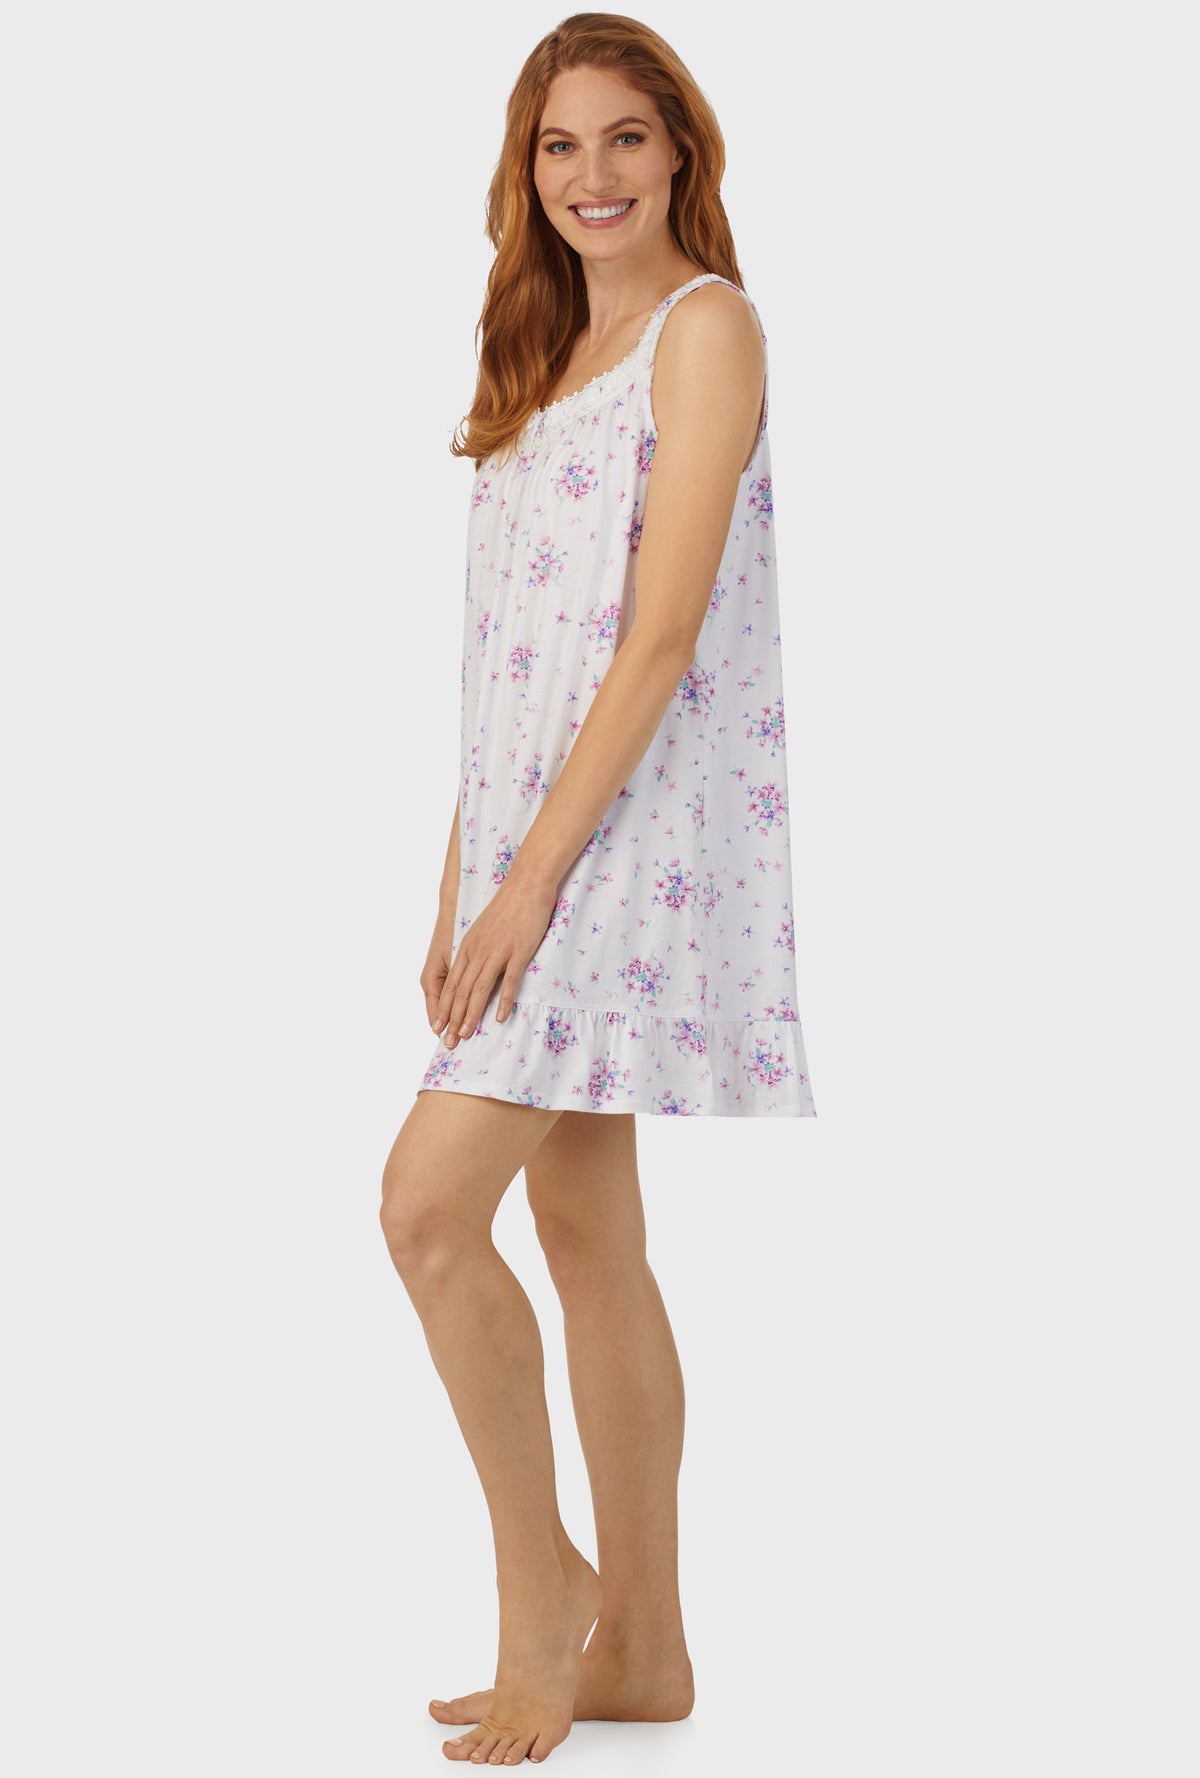 A lady wearing purple sleeveless chemise  with mulberry purple floral bouquet print.